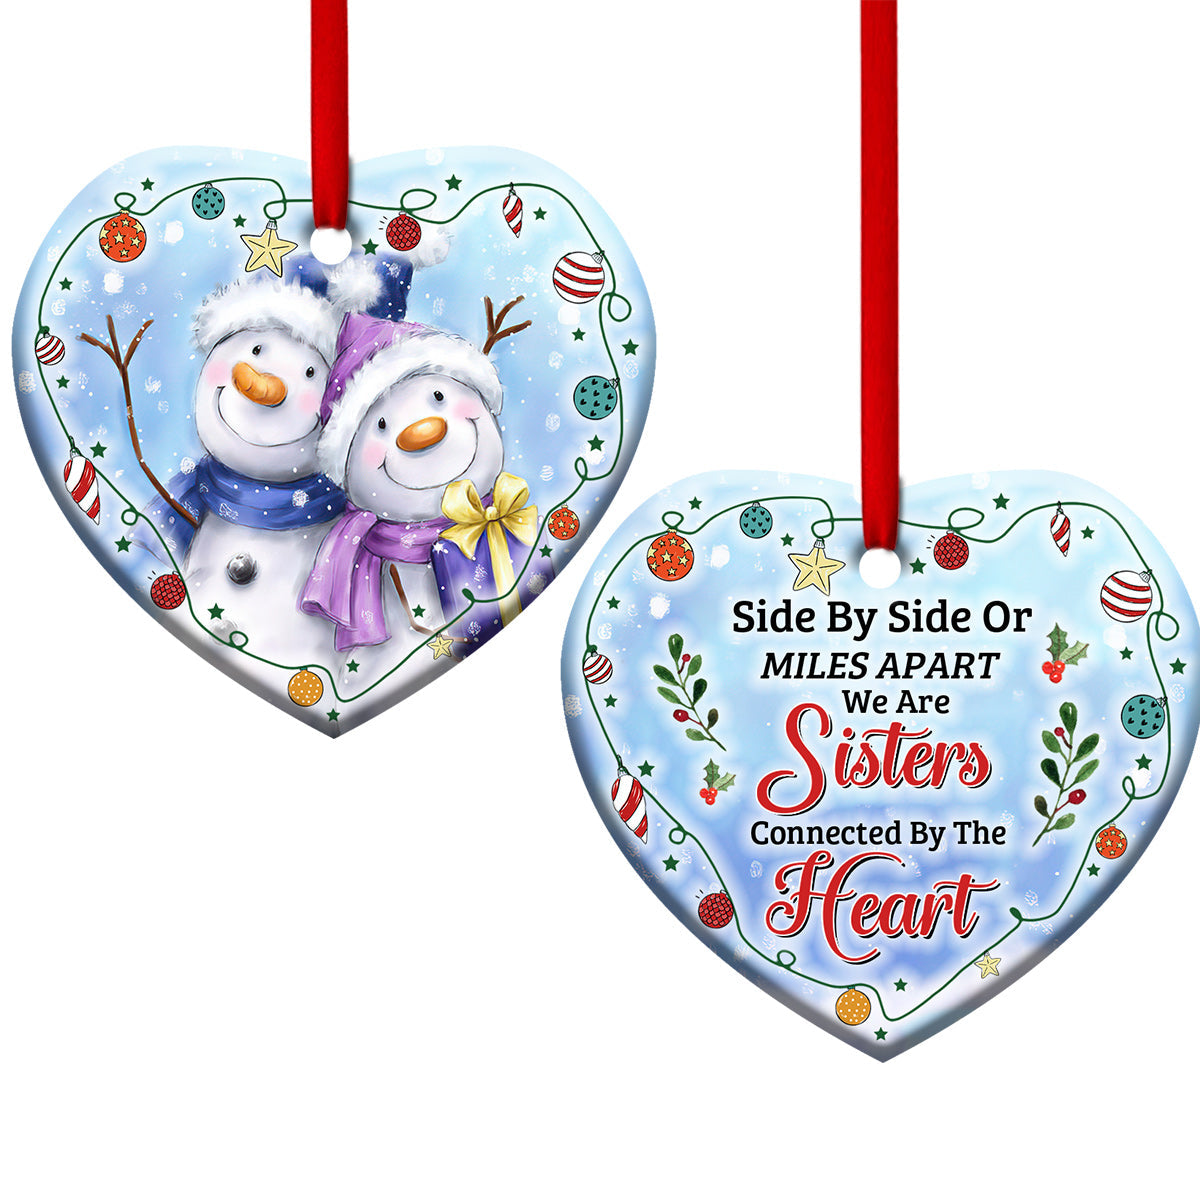 Snowman We Are Sisters Connected By The Heart - Heart Ornament - Owls Matrix LTD